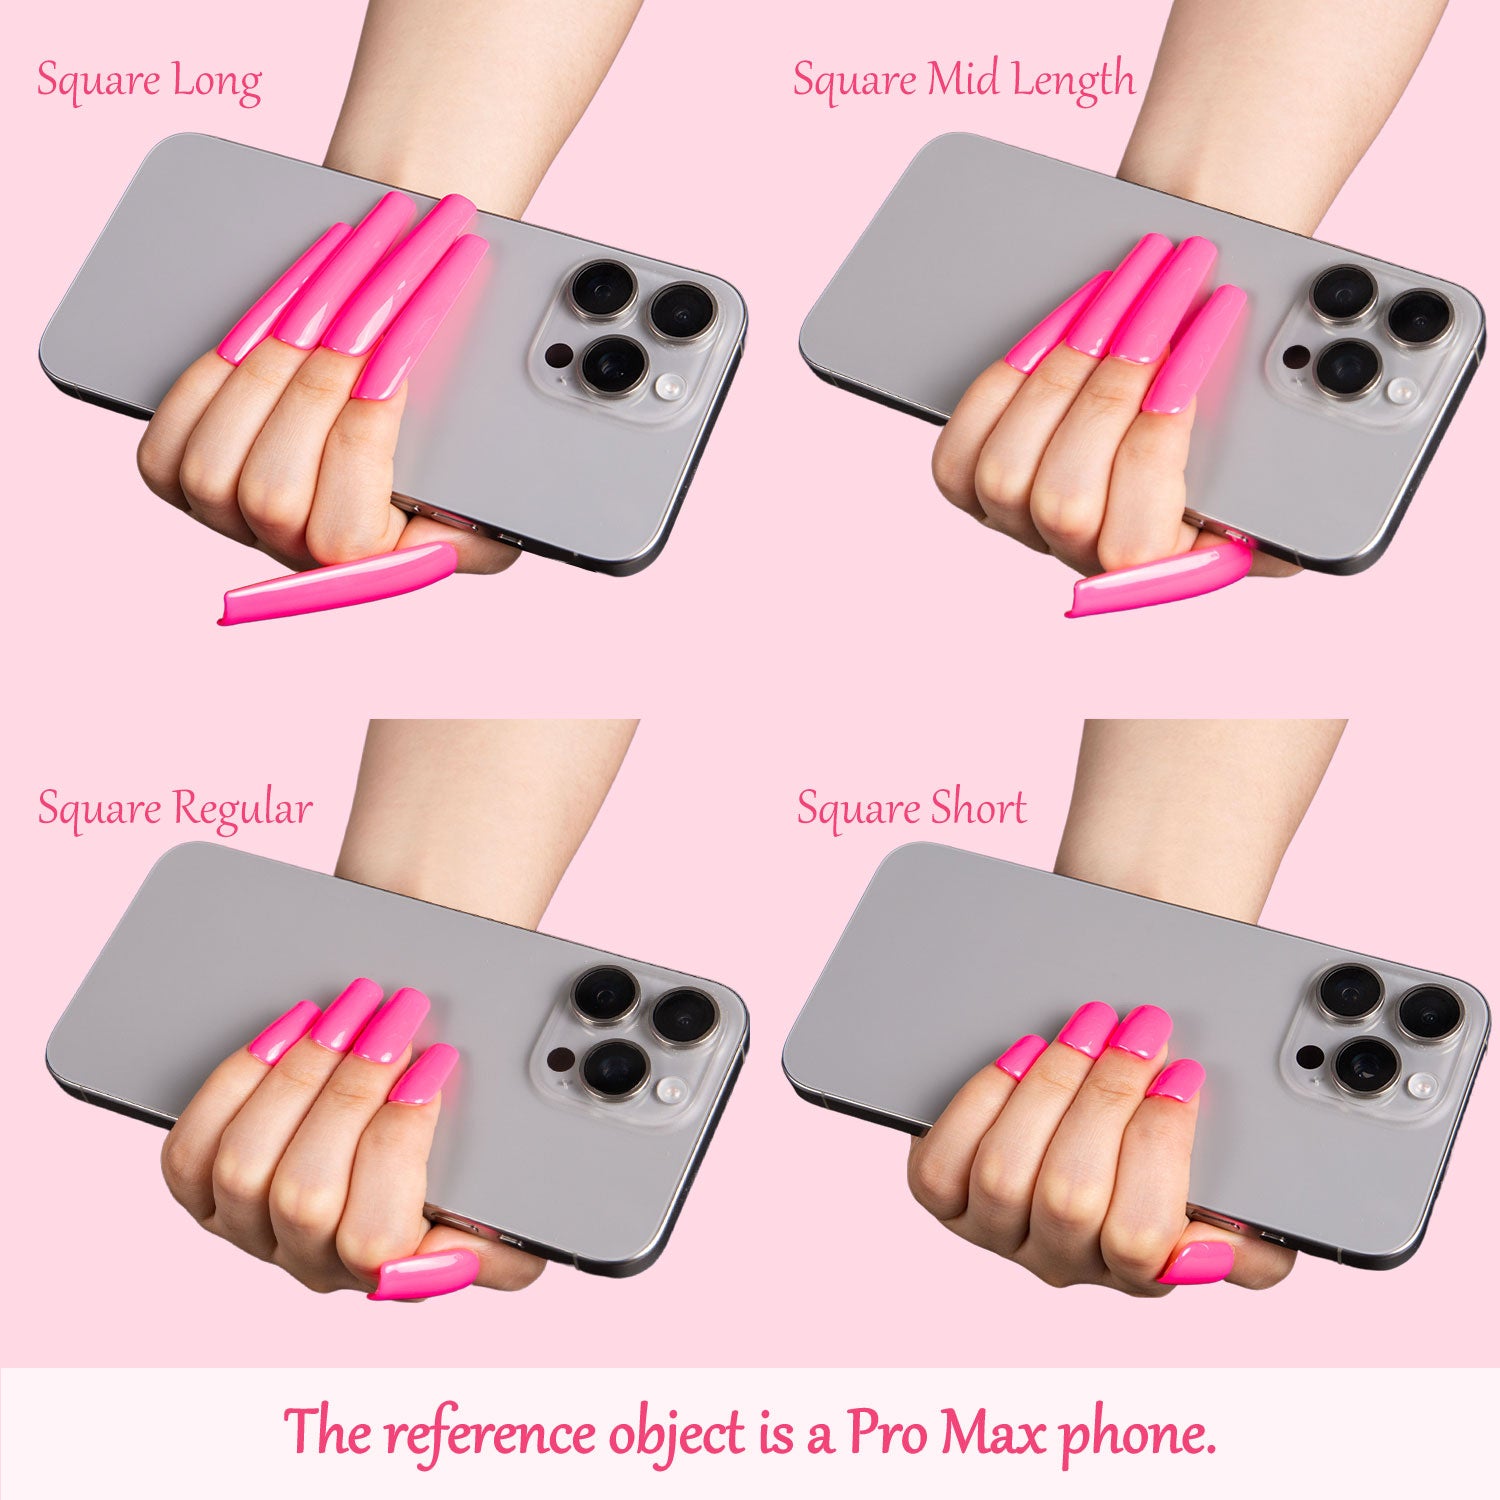 Comparison of four pink press-on nail lengths (Square Long, Square Mid Length, Square Regular, Square Short) holding a Pro Max phone